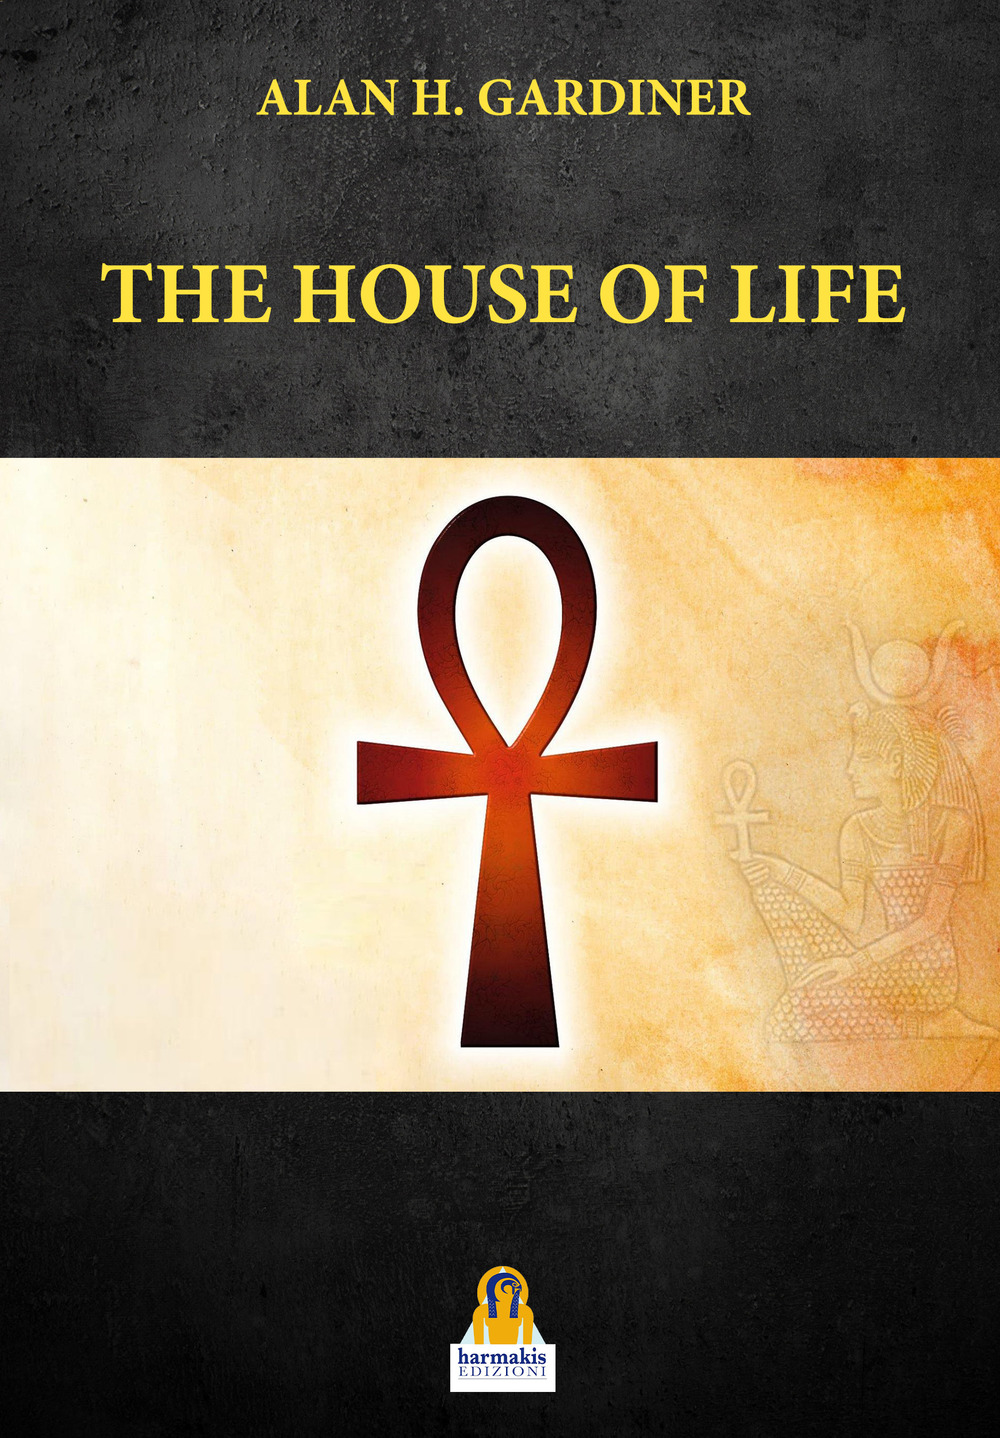 The house of life